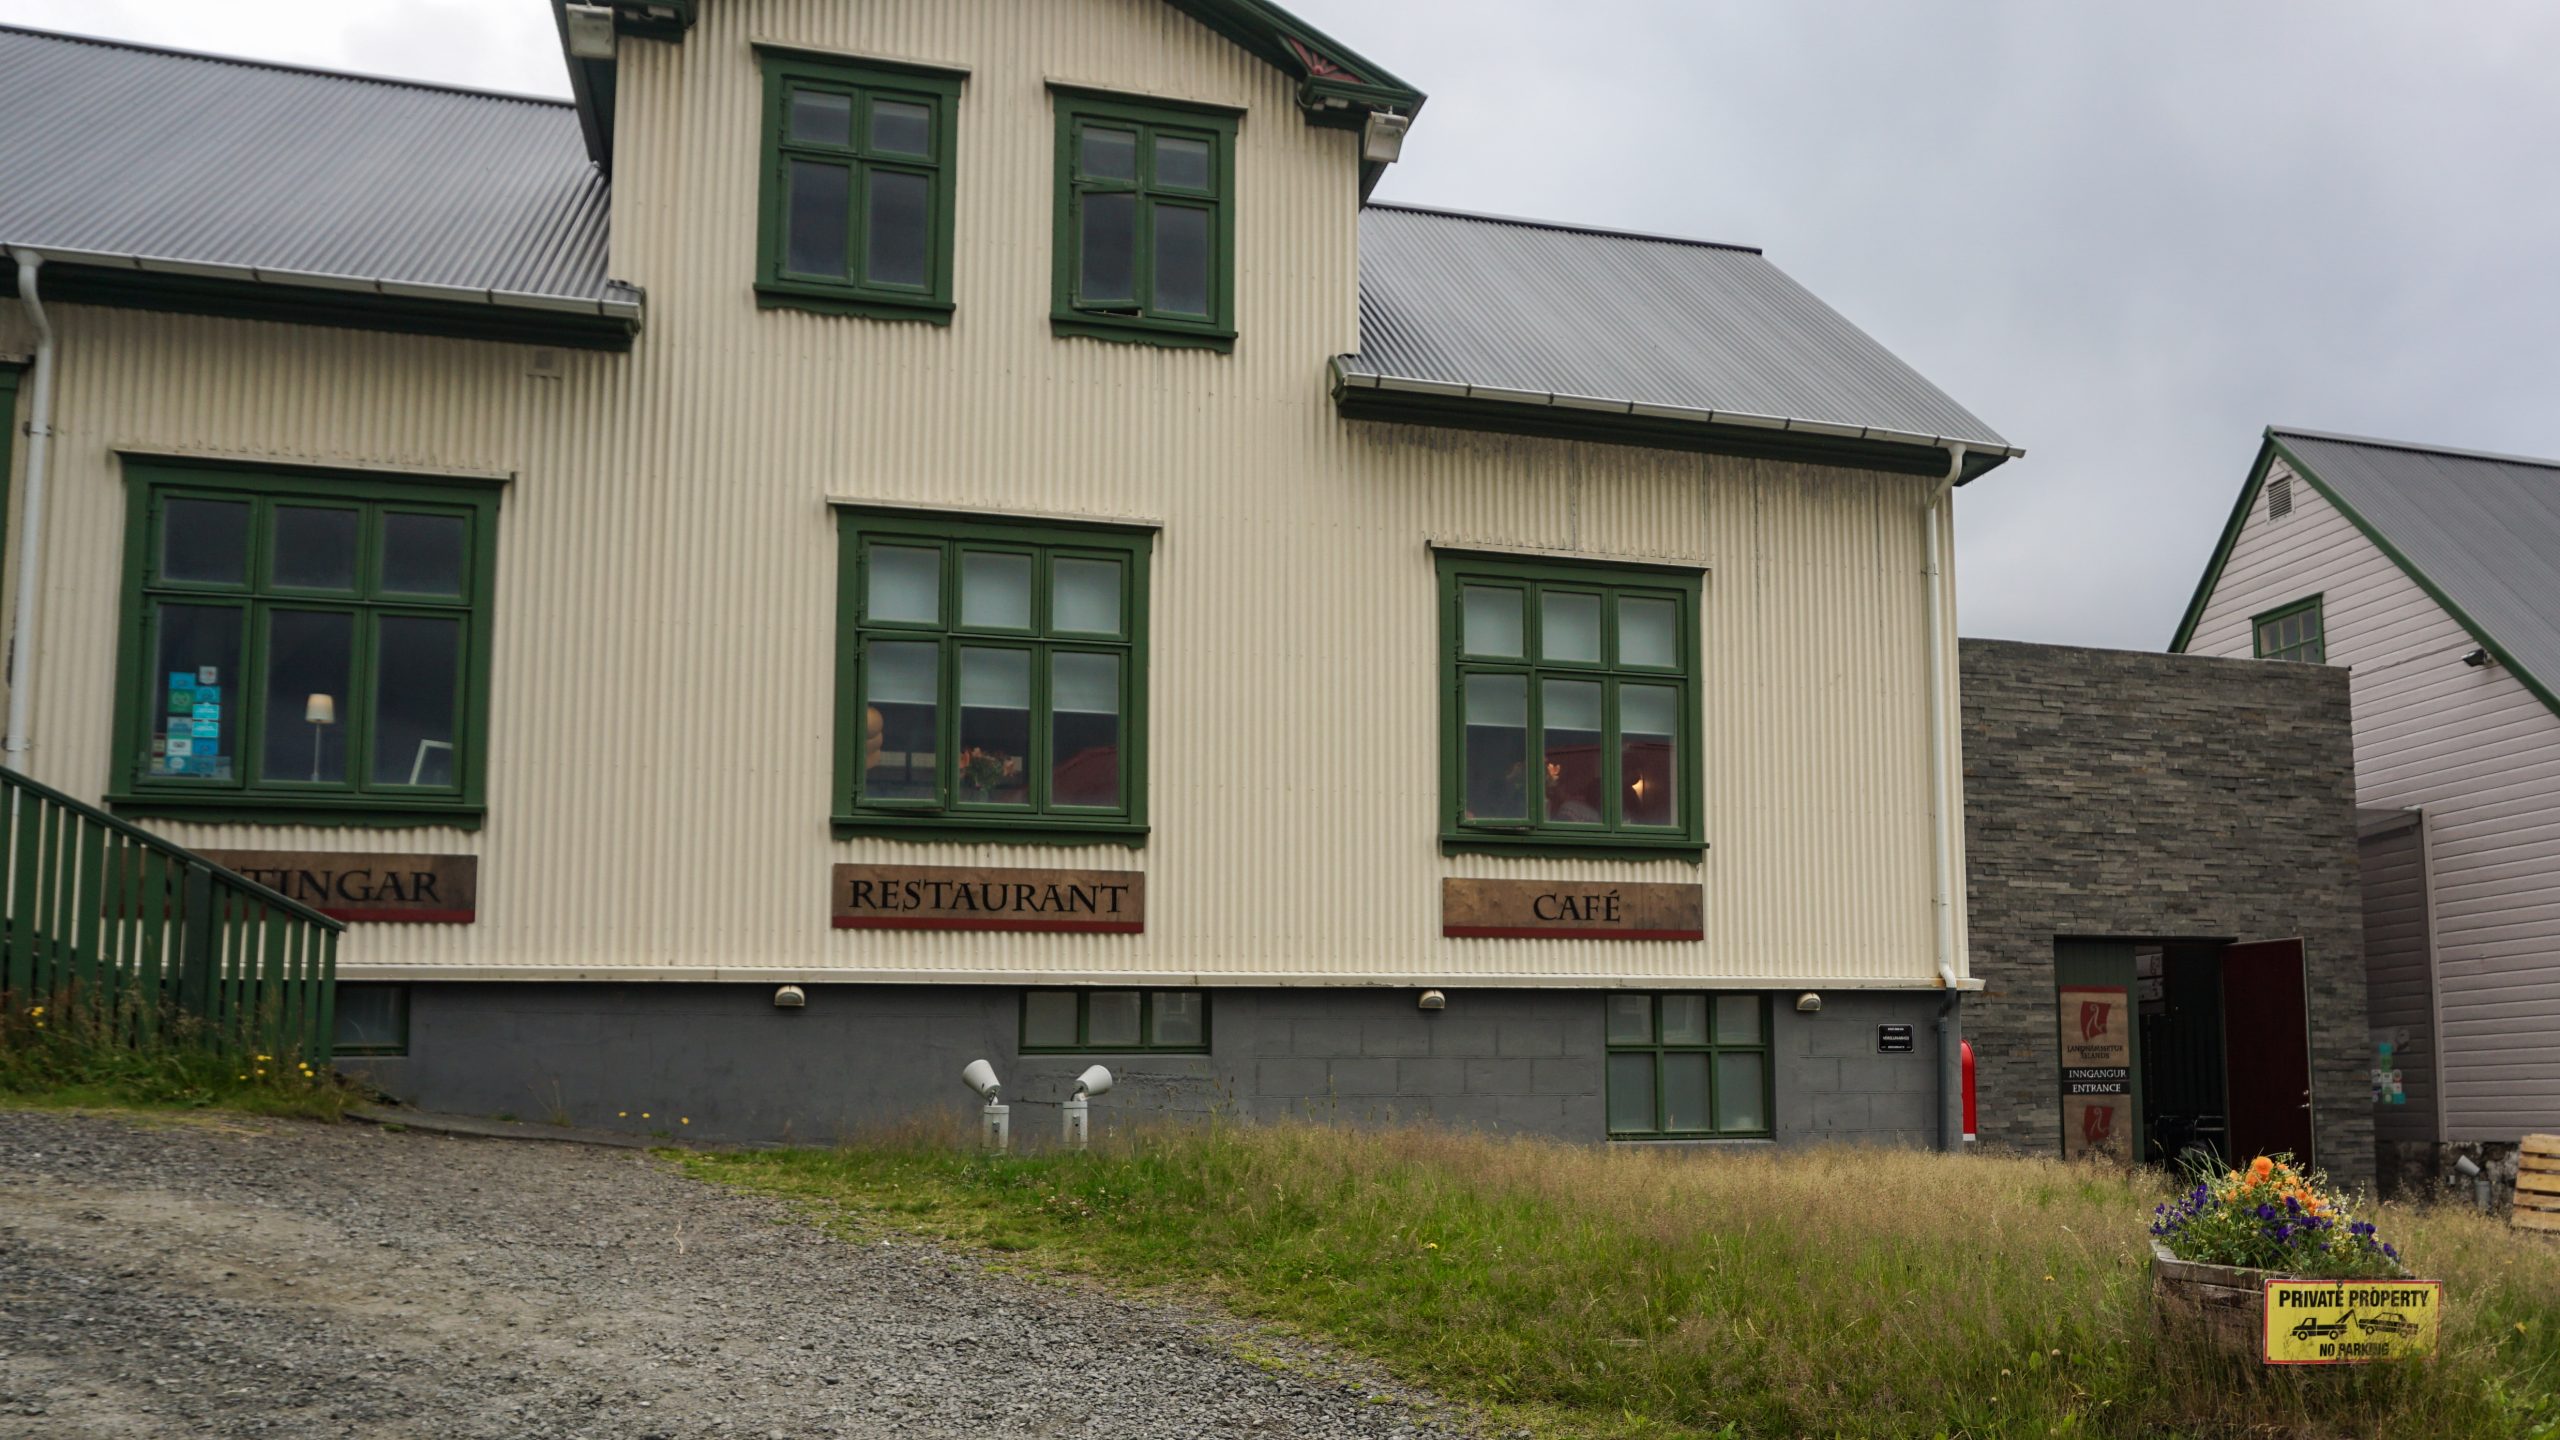 The exterior of the Settlement Centre in Iceland